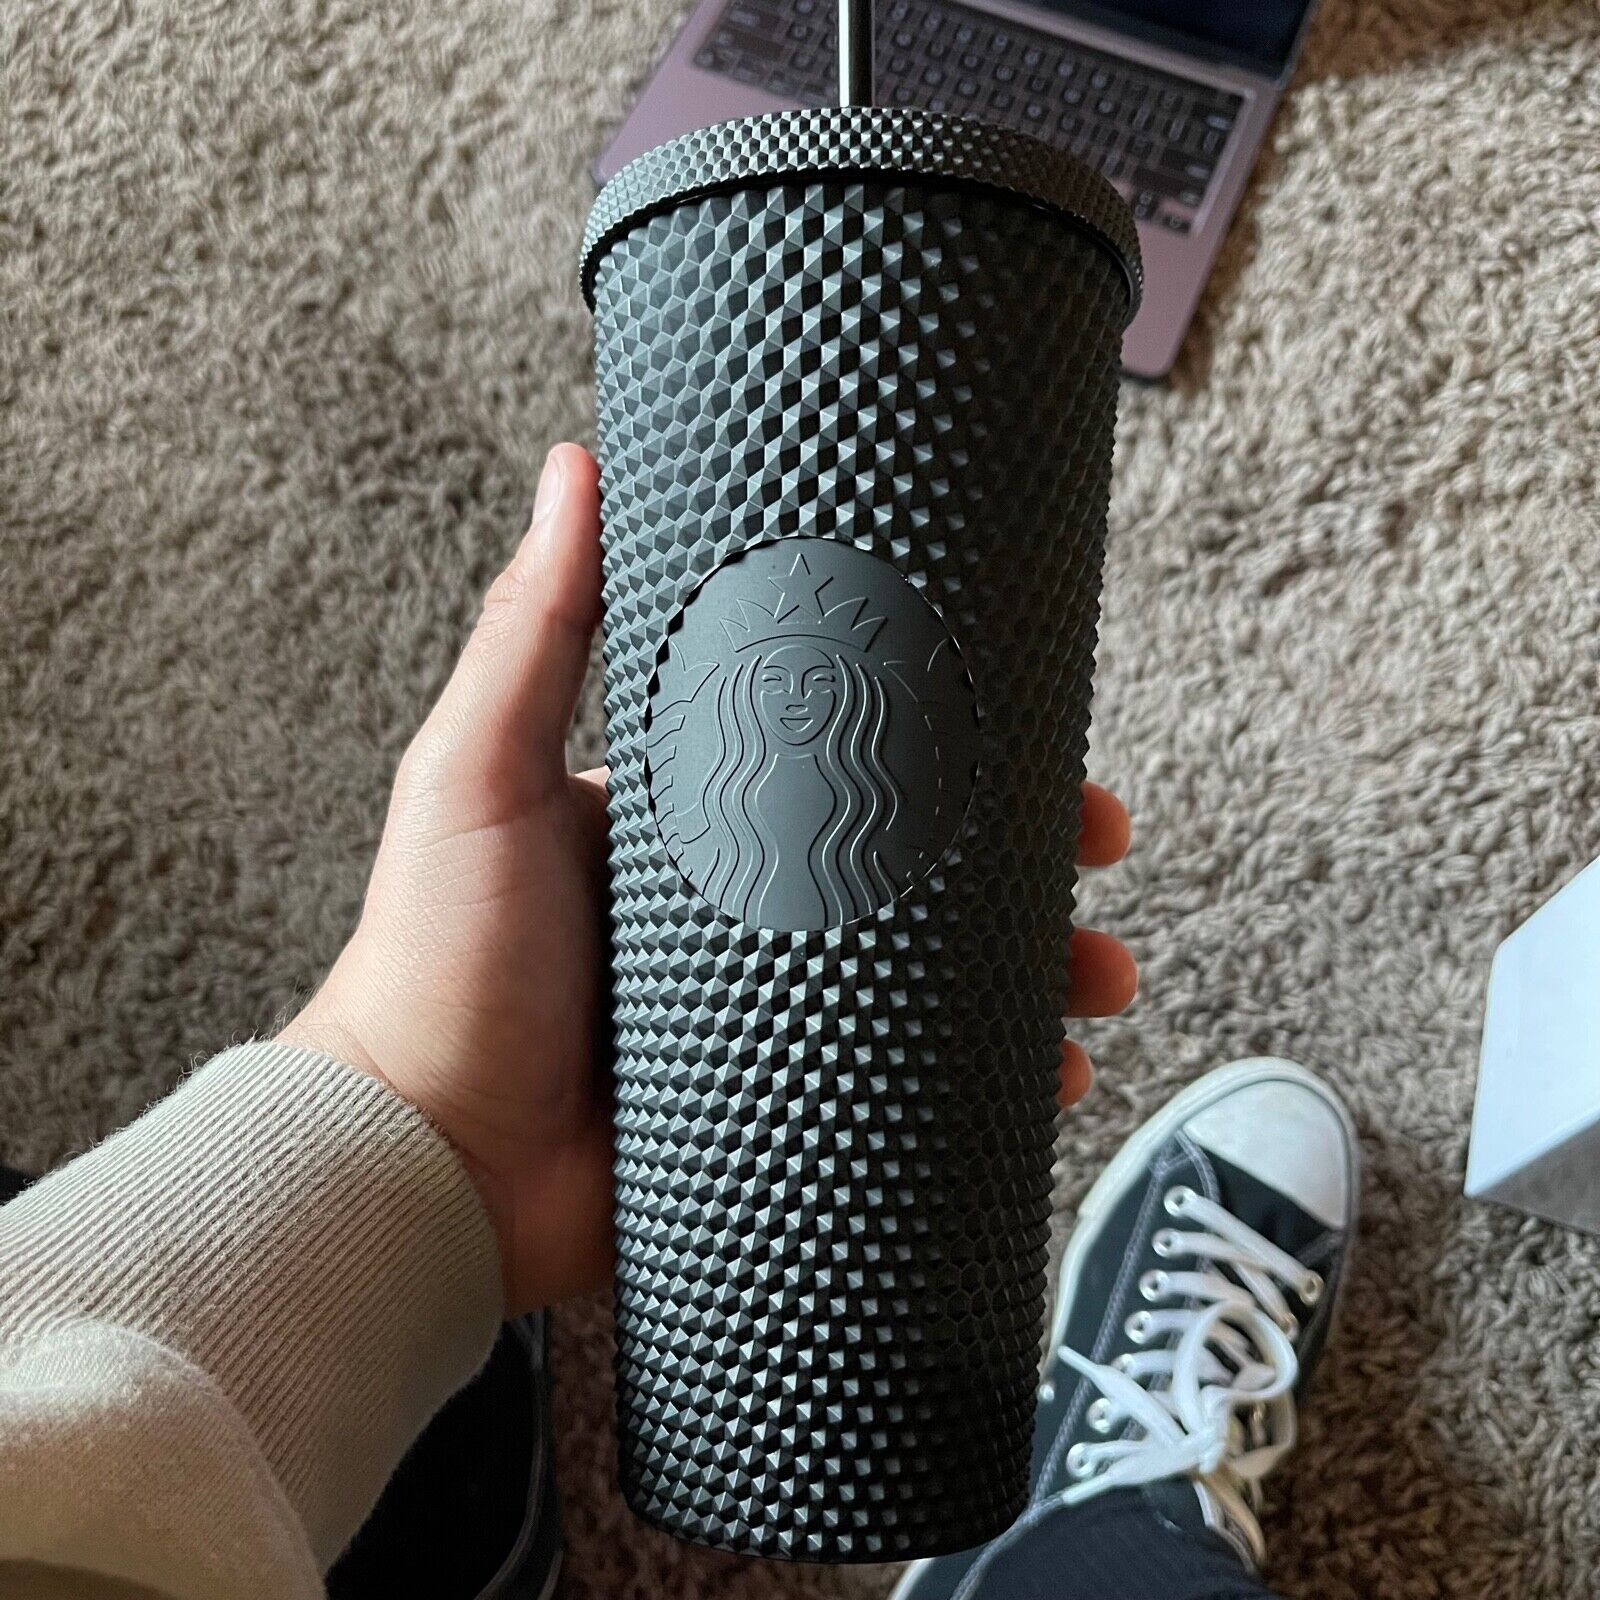 Starbucks Limited Edition Studded Tumbler Cup - Matte Black